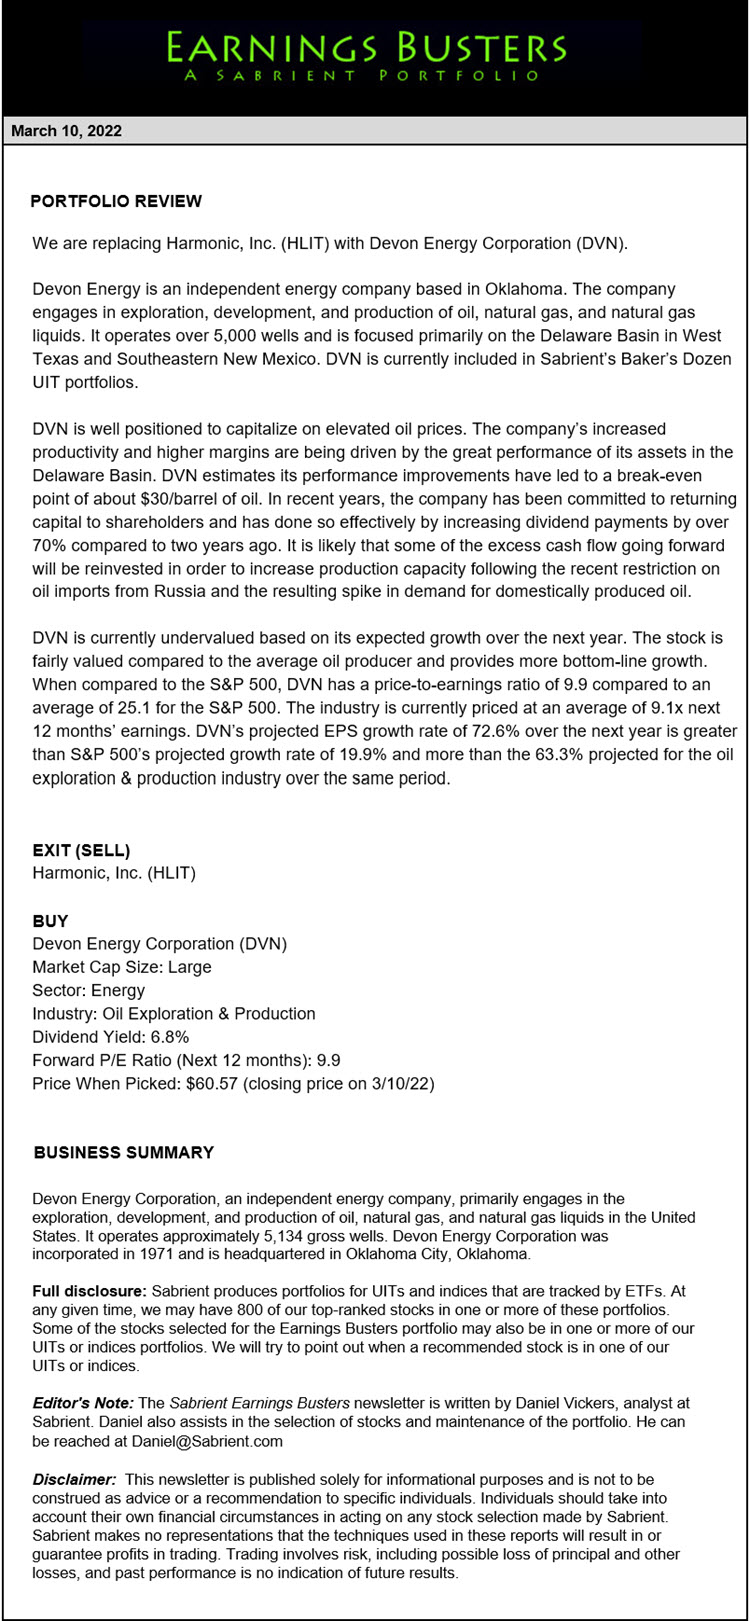 Earnings Busters Newsletter - March 10, 2022